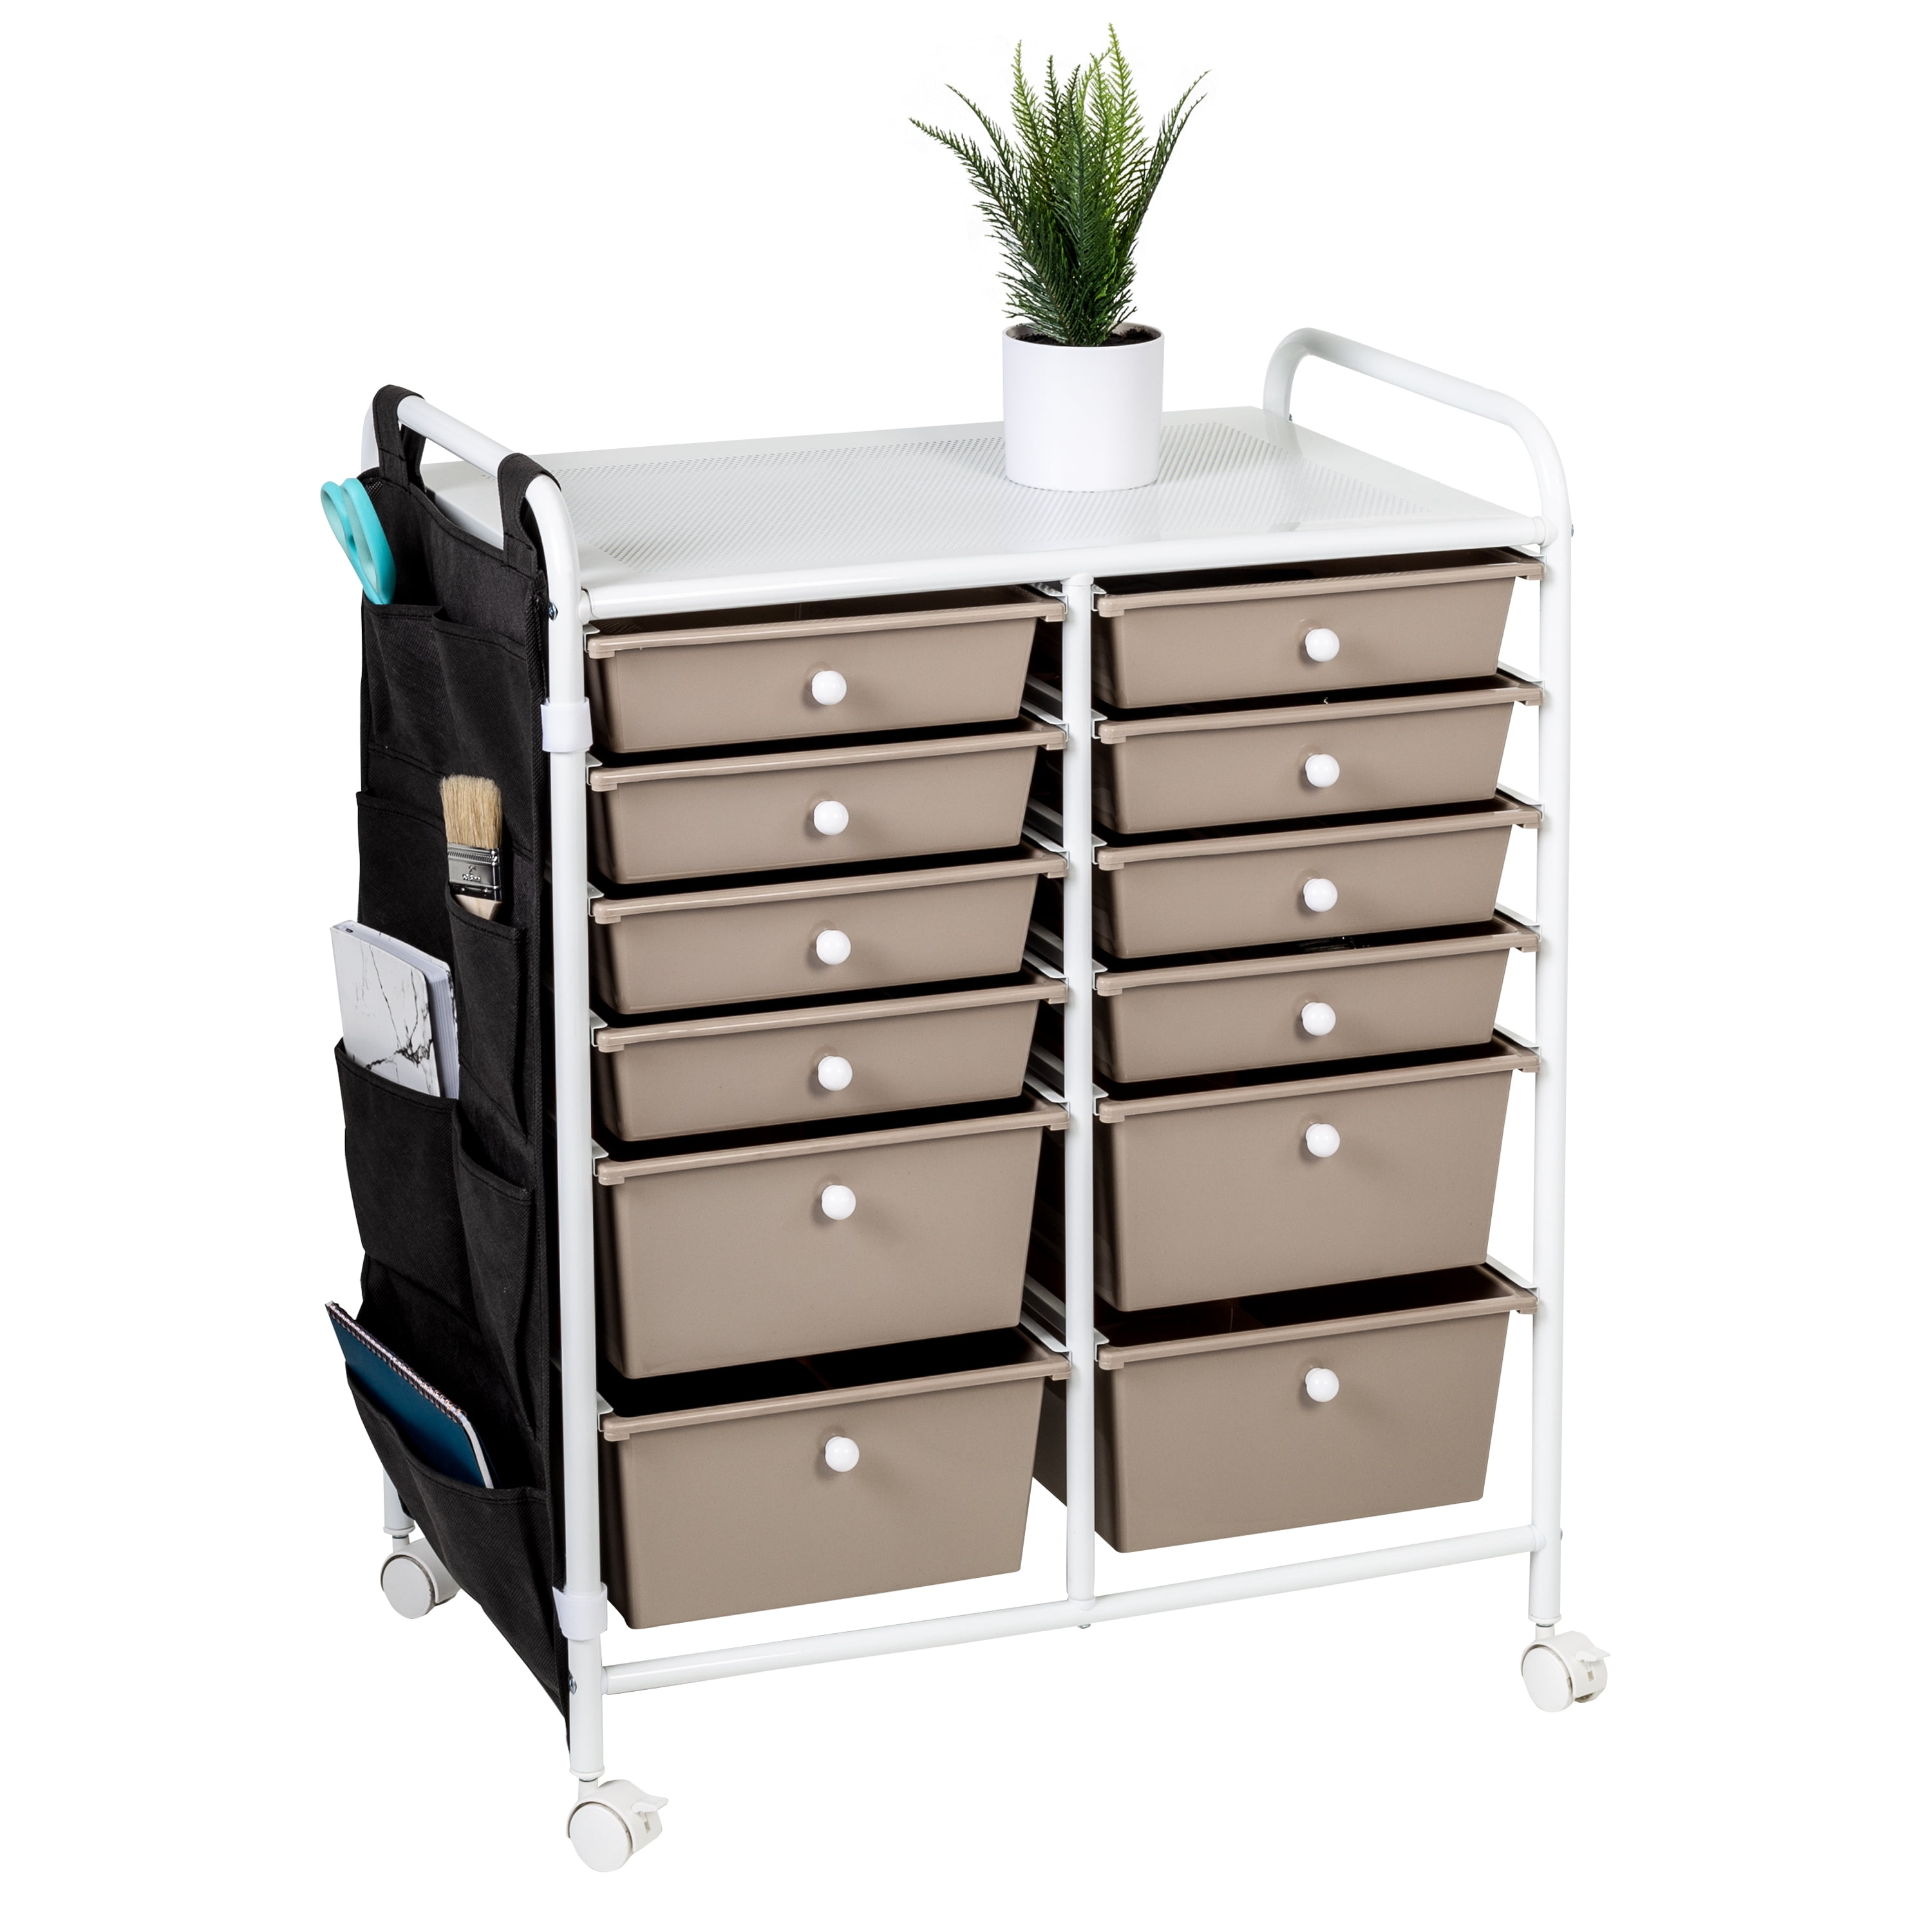 Honey-Can-Do Rolling Storage Cart and Organizer with 12 Plastic Drawers Renewed 